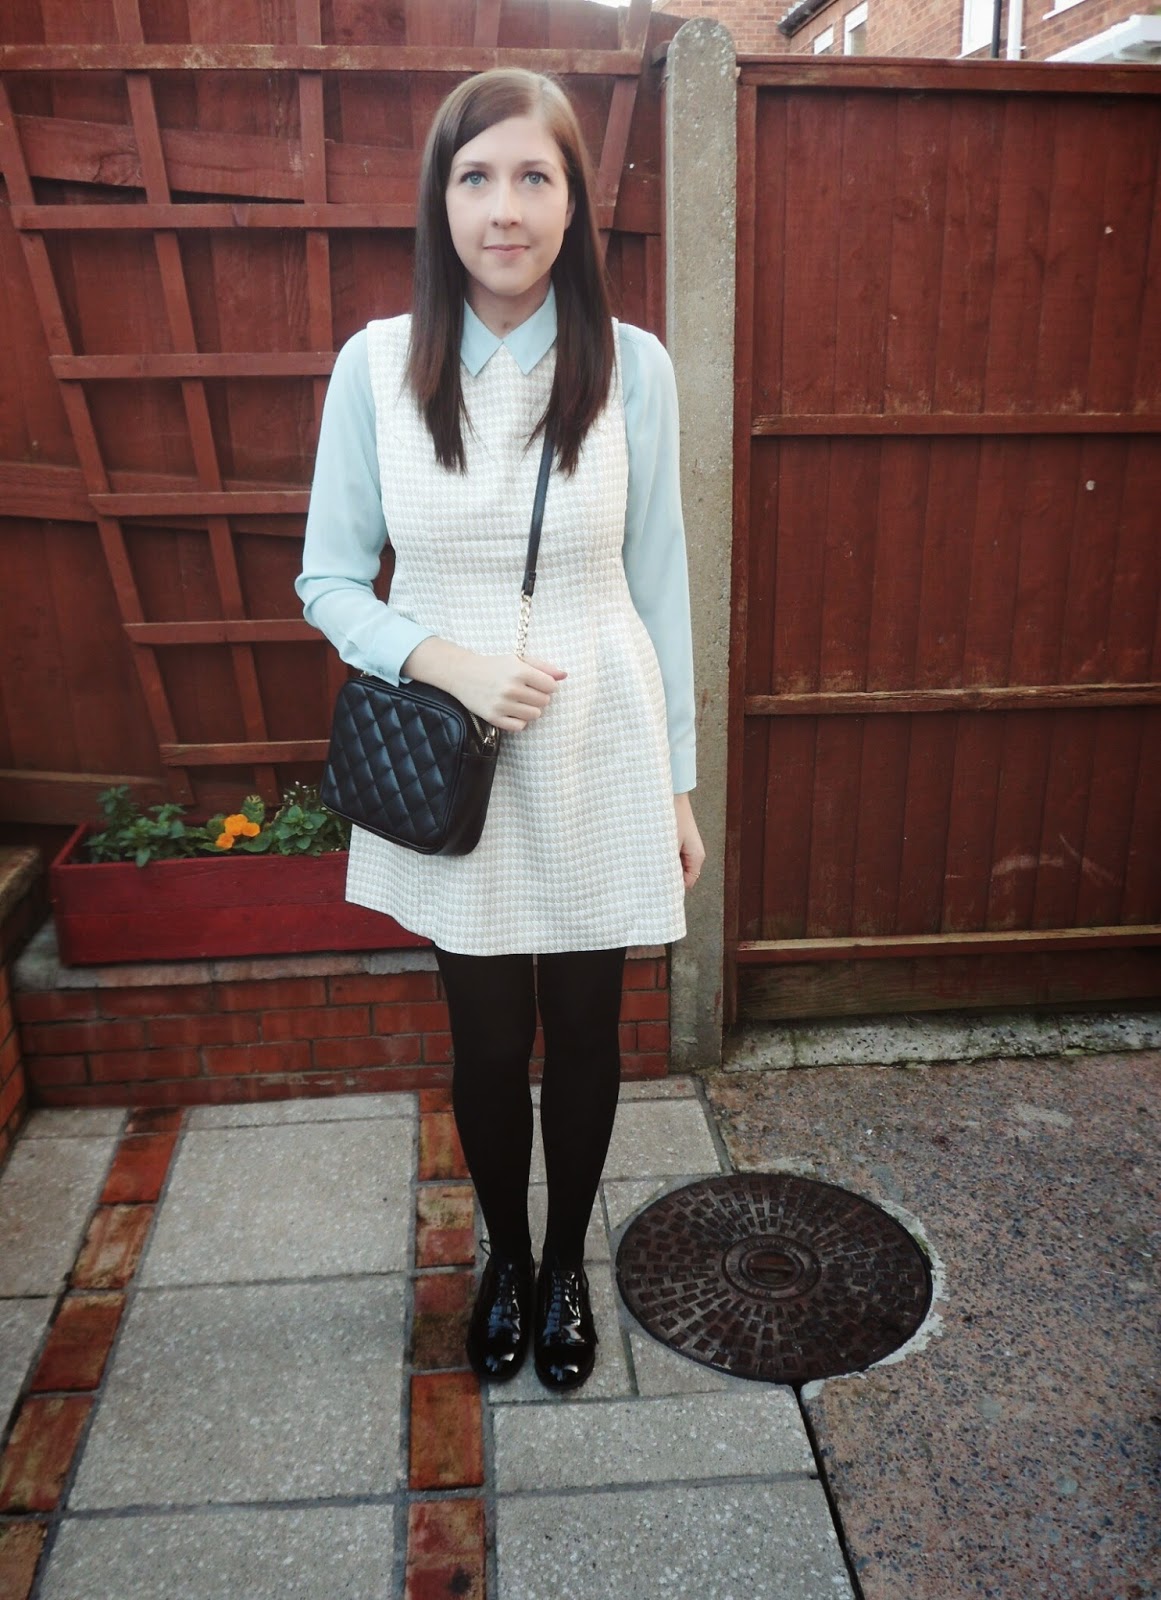 asseenonme, asos, primark, fuschiawhite, wiw, whatimwearing, ootd, outfitoftheday, lotd, lookoftheday, fbloggers, fashion, fashionbloggers, chanel, fblogger, brogues, gingham, fashionblogger, winterfashion, pastels